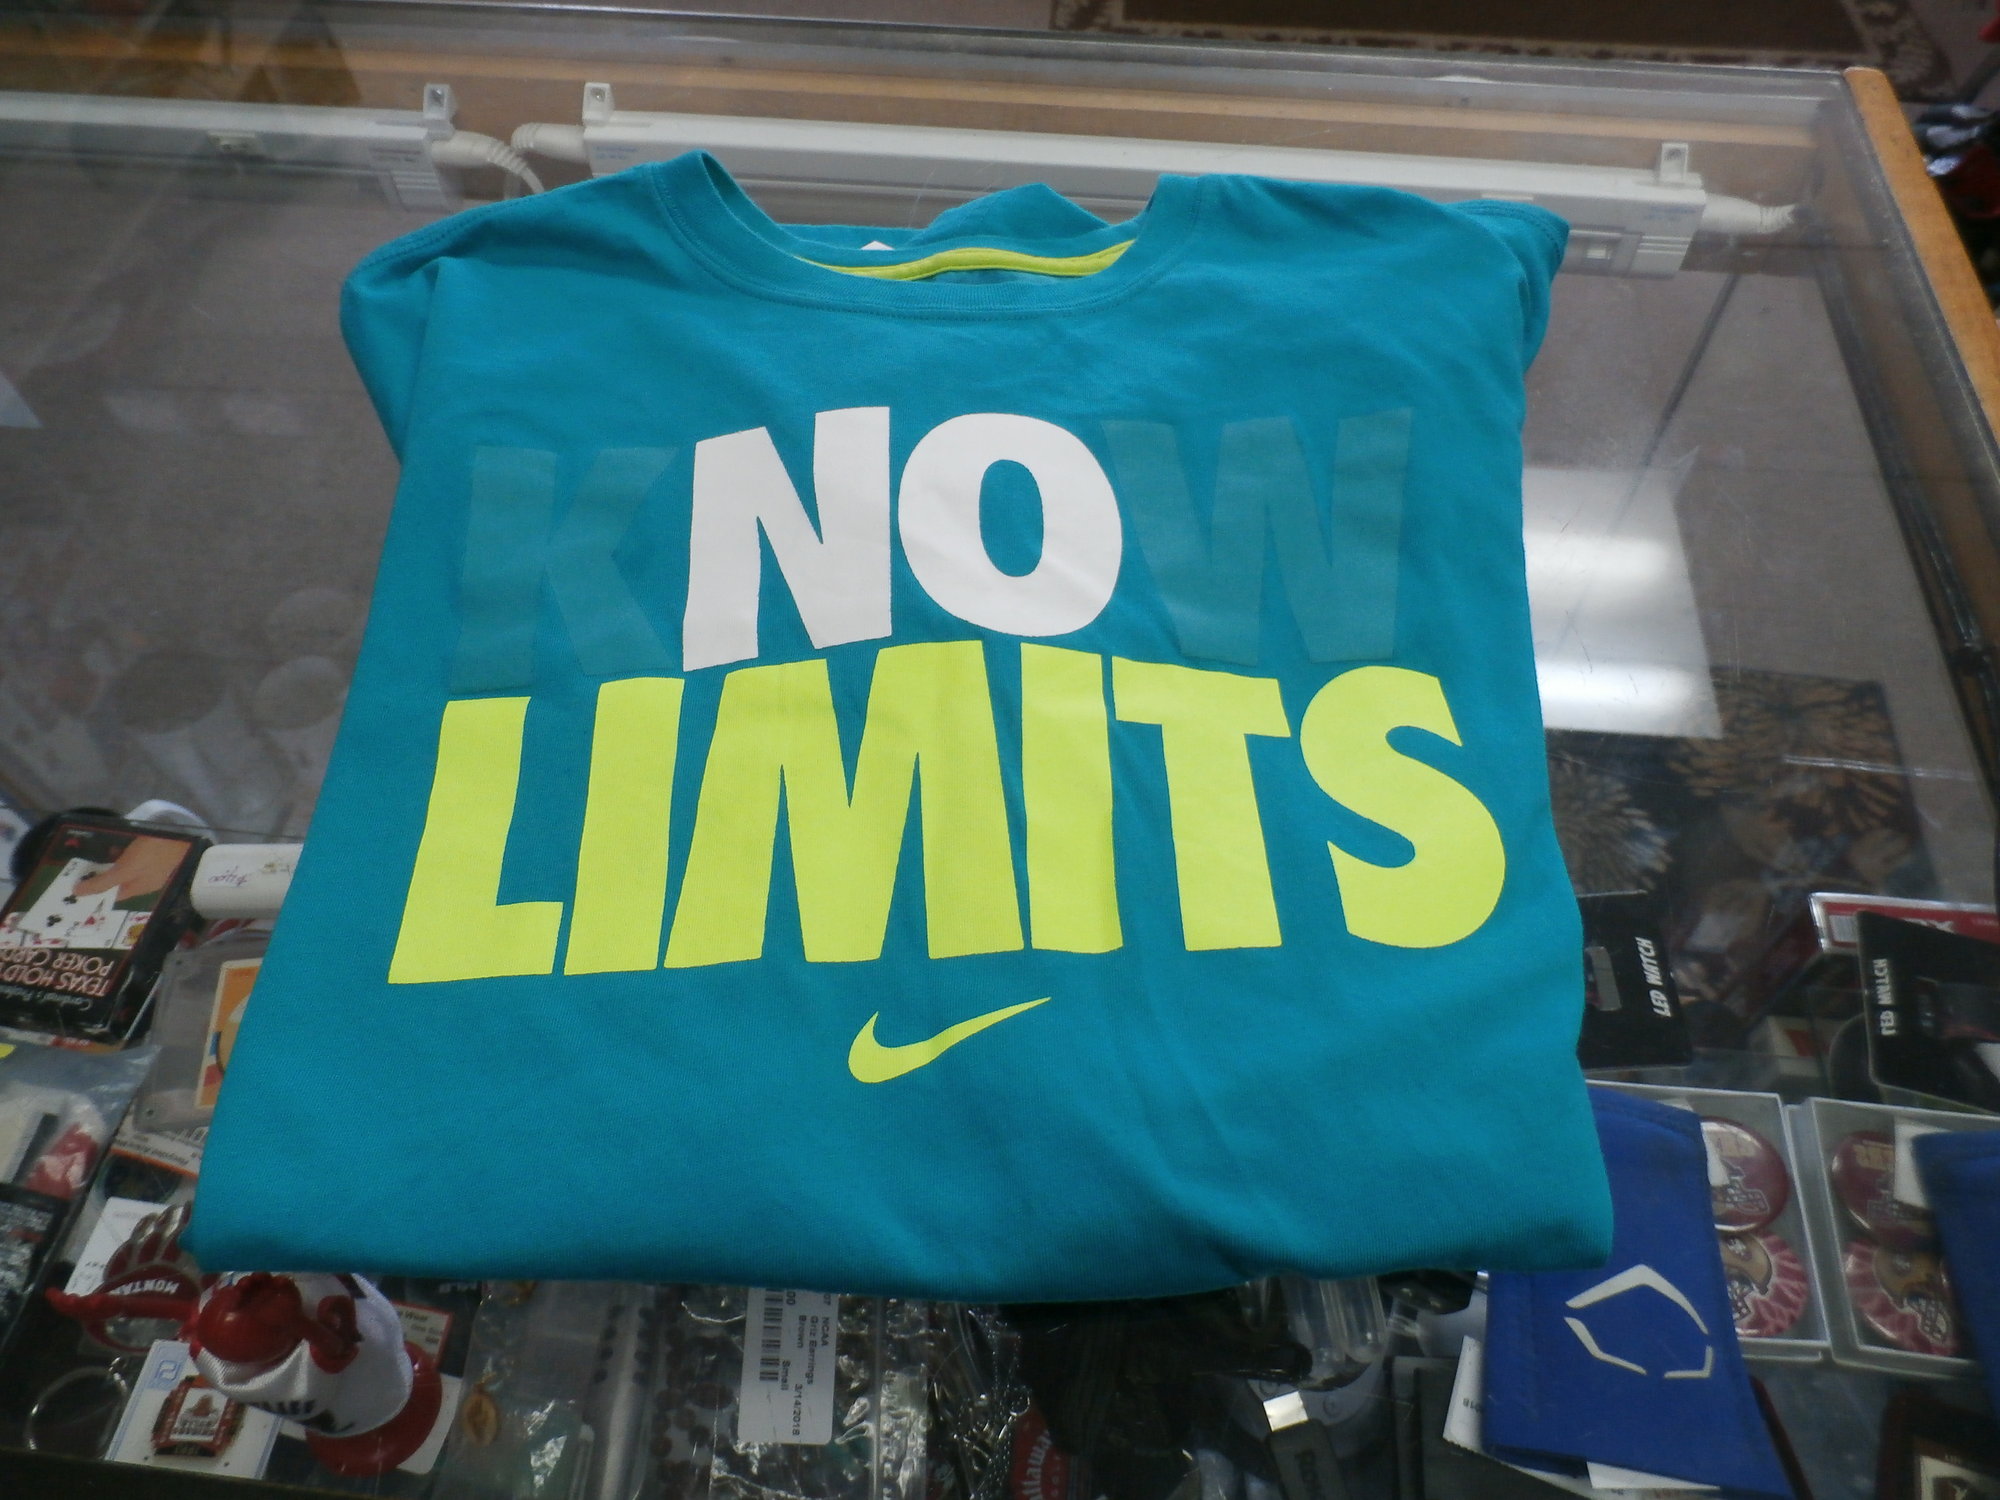 Edele Gedateerd Panter Nike No Limits Shirt | Recycled ActiveWear ~ FREE SHIPPING USA ONLY~